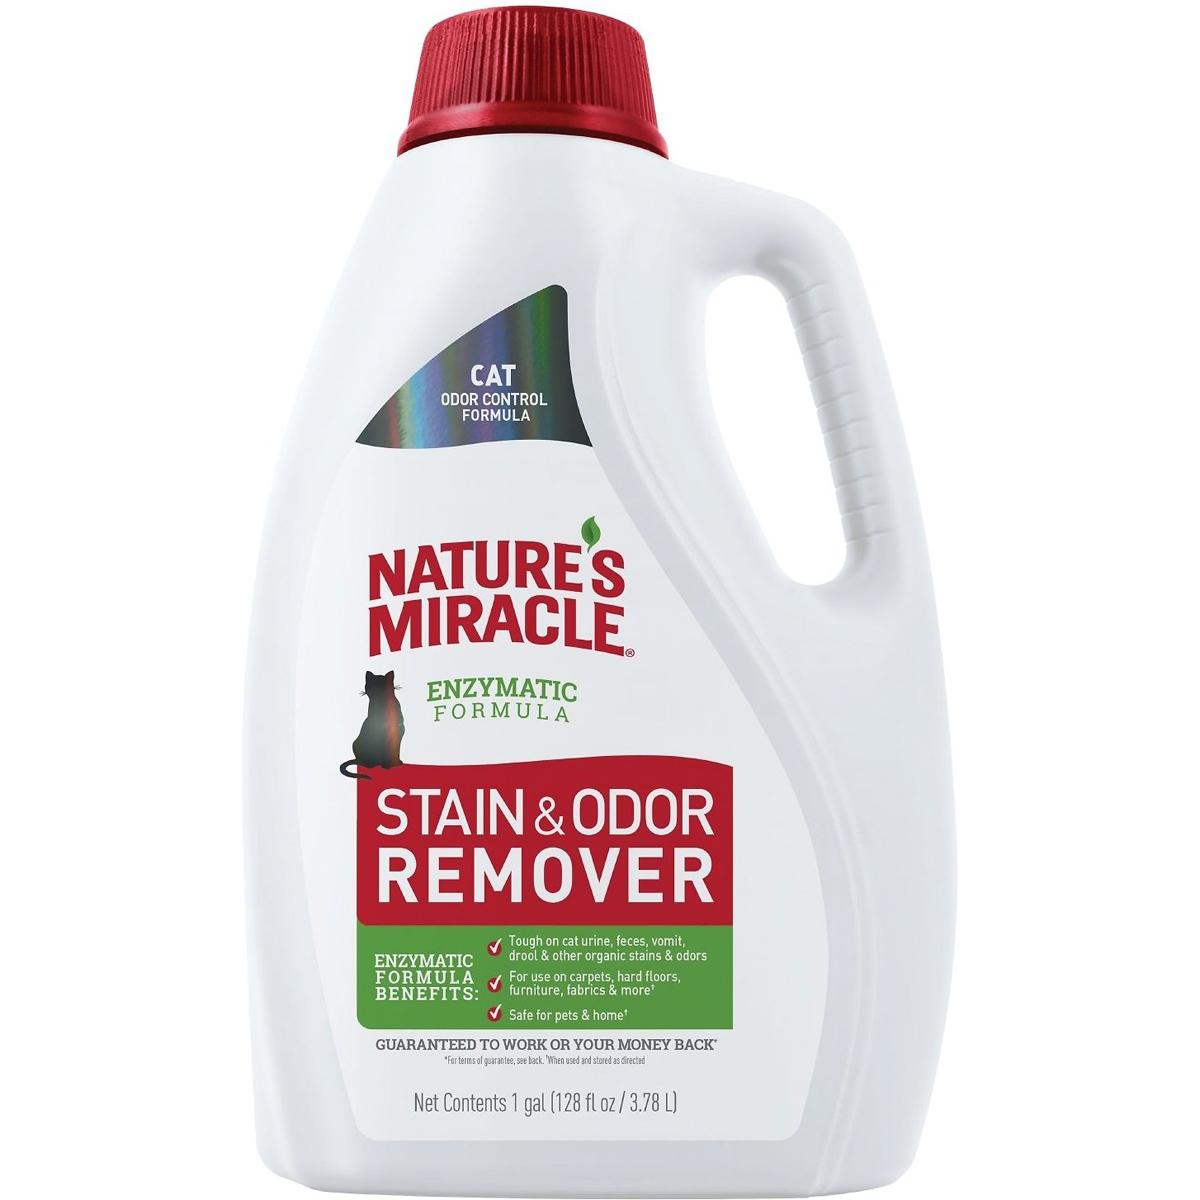 128oz Natures Miracle Cat Enzymatic Stain and Odor Remover for $6.87